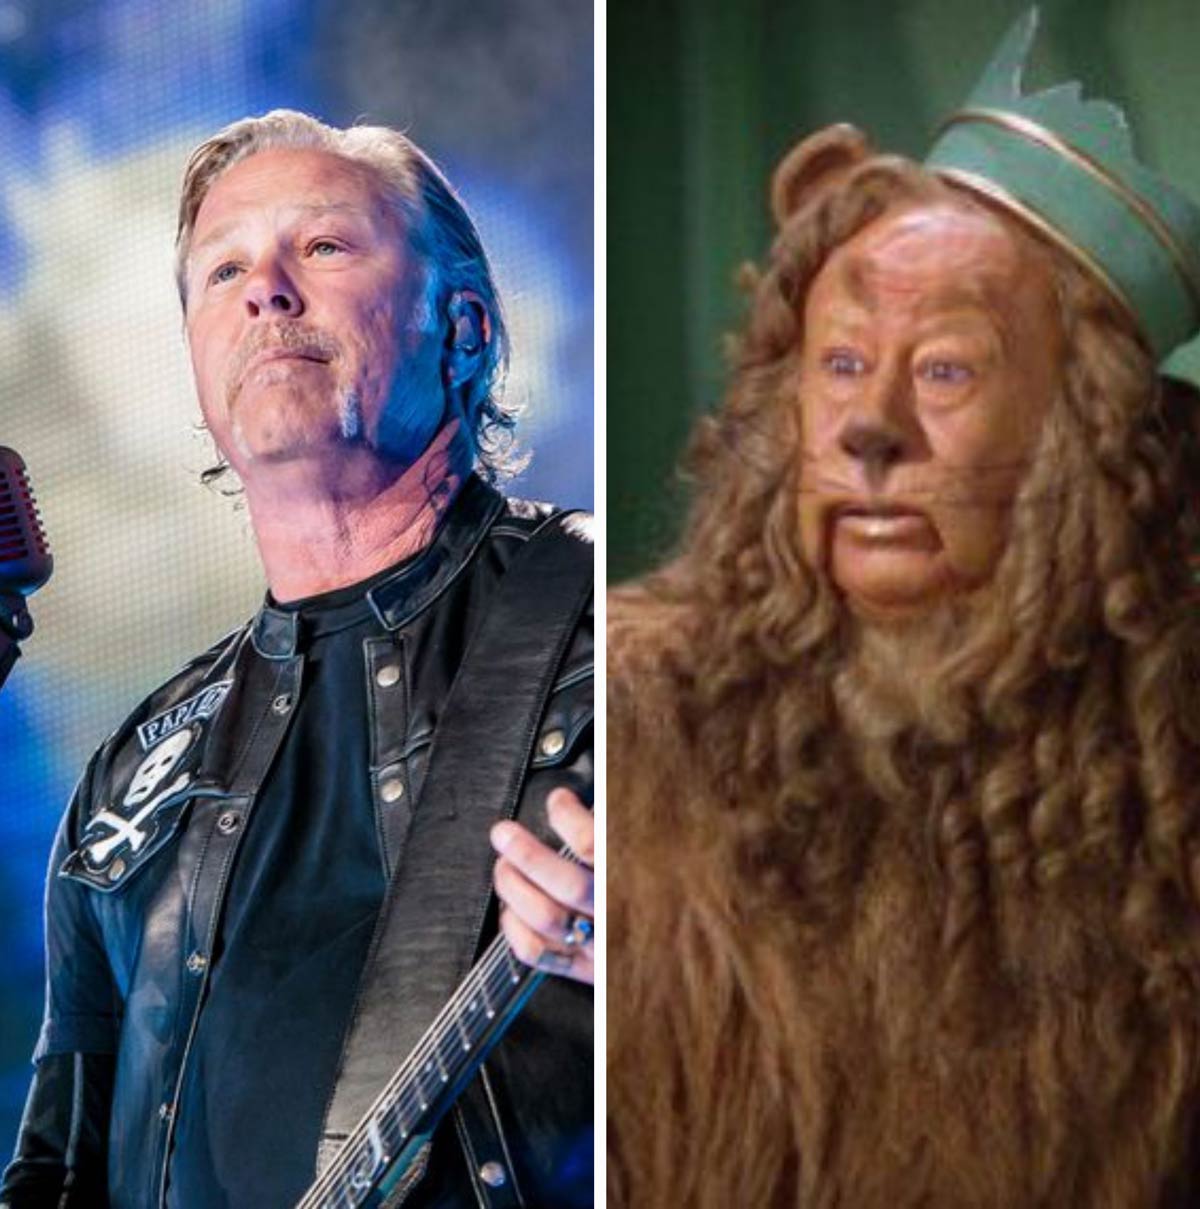 I'm just saying... I've never seen James Hetfield and the Cowardly Lion in the same room